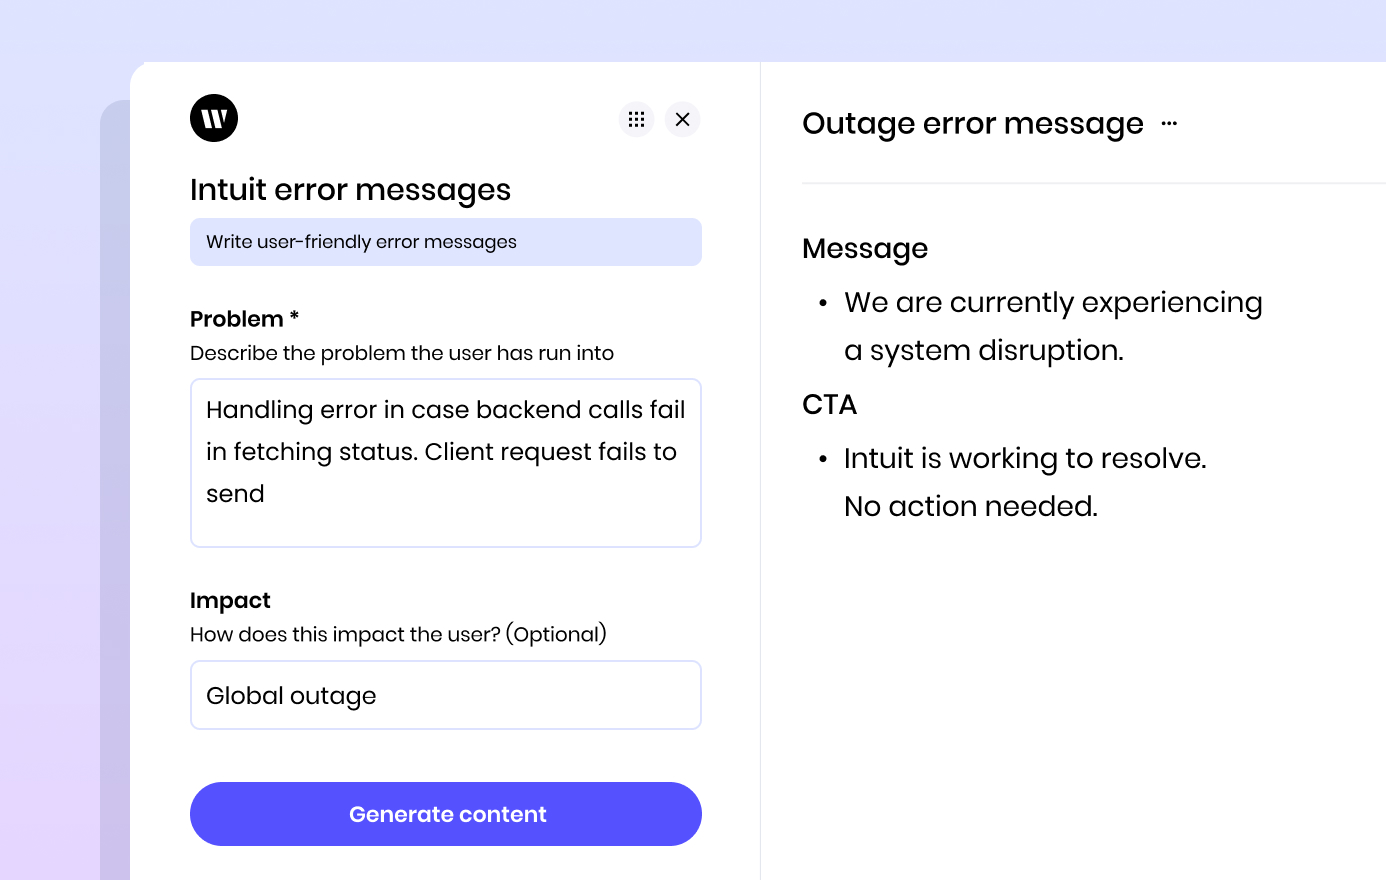 Intuit error messages

Problem:
Handling error in case backend calls fail in fetching status. Client request fails to send

Impact:
Global outage

Outage error message:
Message
We are currently experiencing a system disruption.
CTA
Intuit is working to resolve. No action needed.